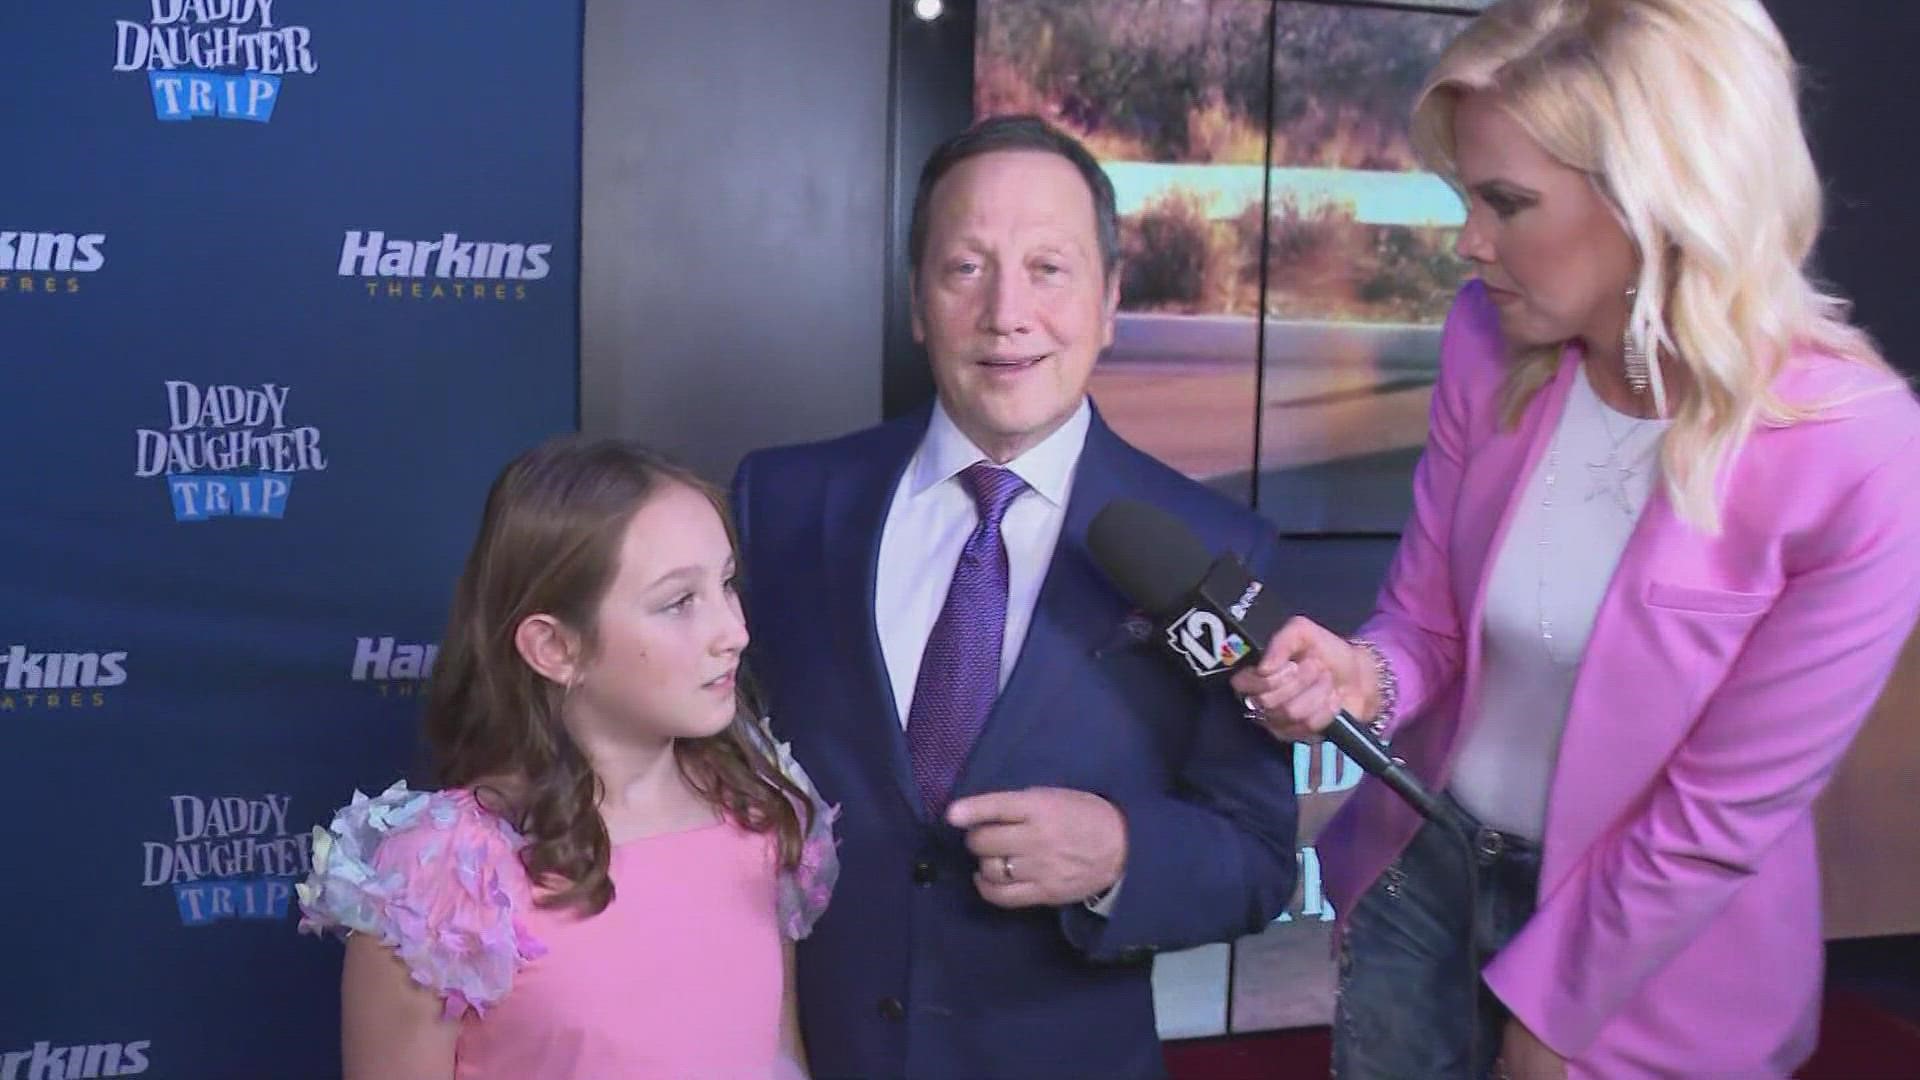 12News’ Krystle Henderson was live on the red carpet for Rob Schneider’s new movie.